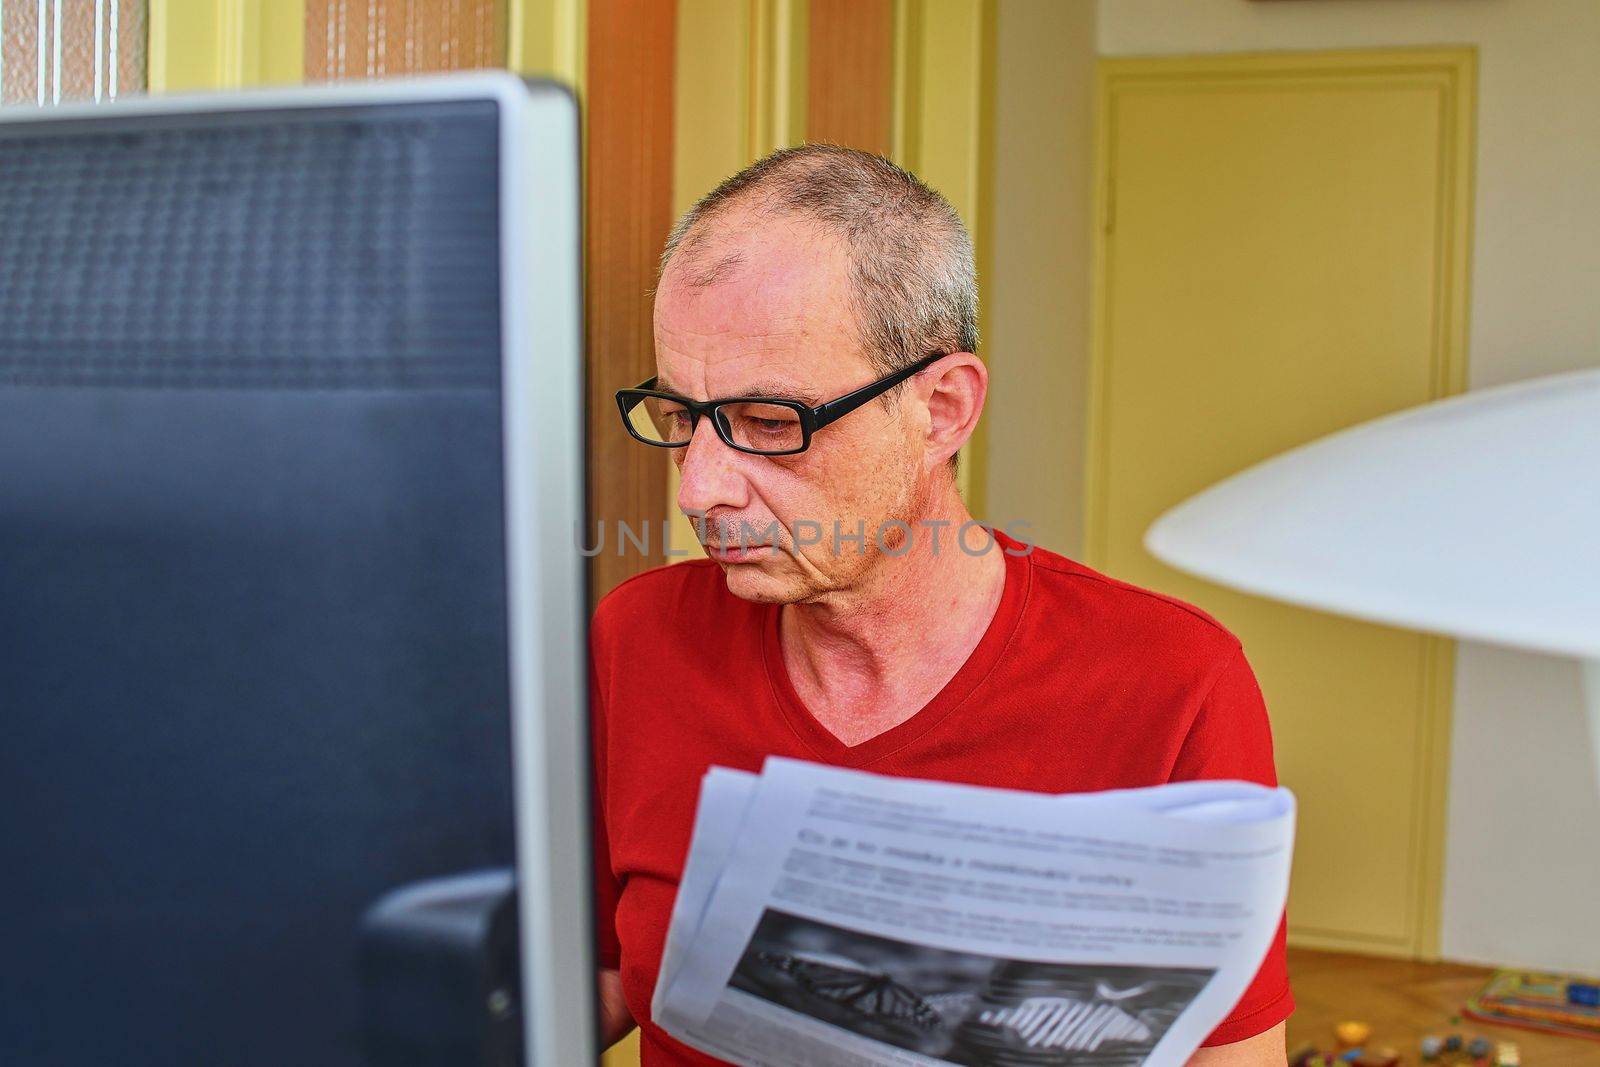 Middle aged man with glasses sitting at desk. Mature man using personal computer. Senior concept.  Man and paperwork. Pensive man  working at home office. 